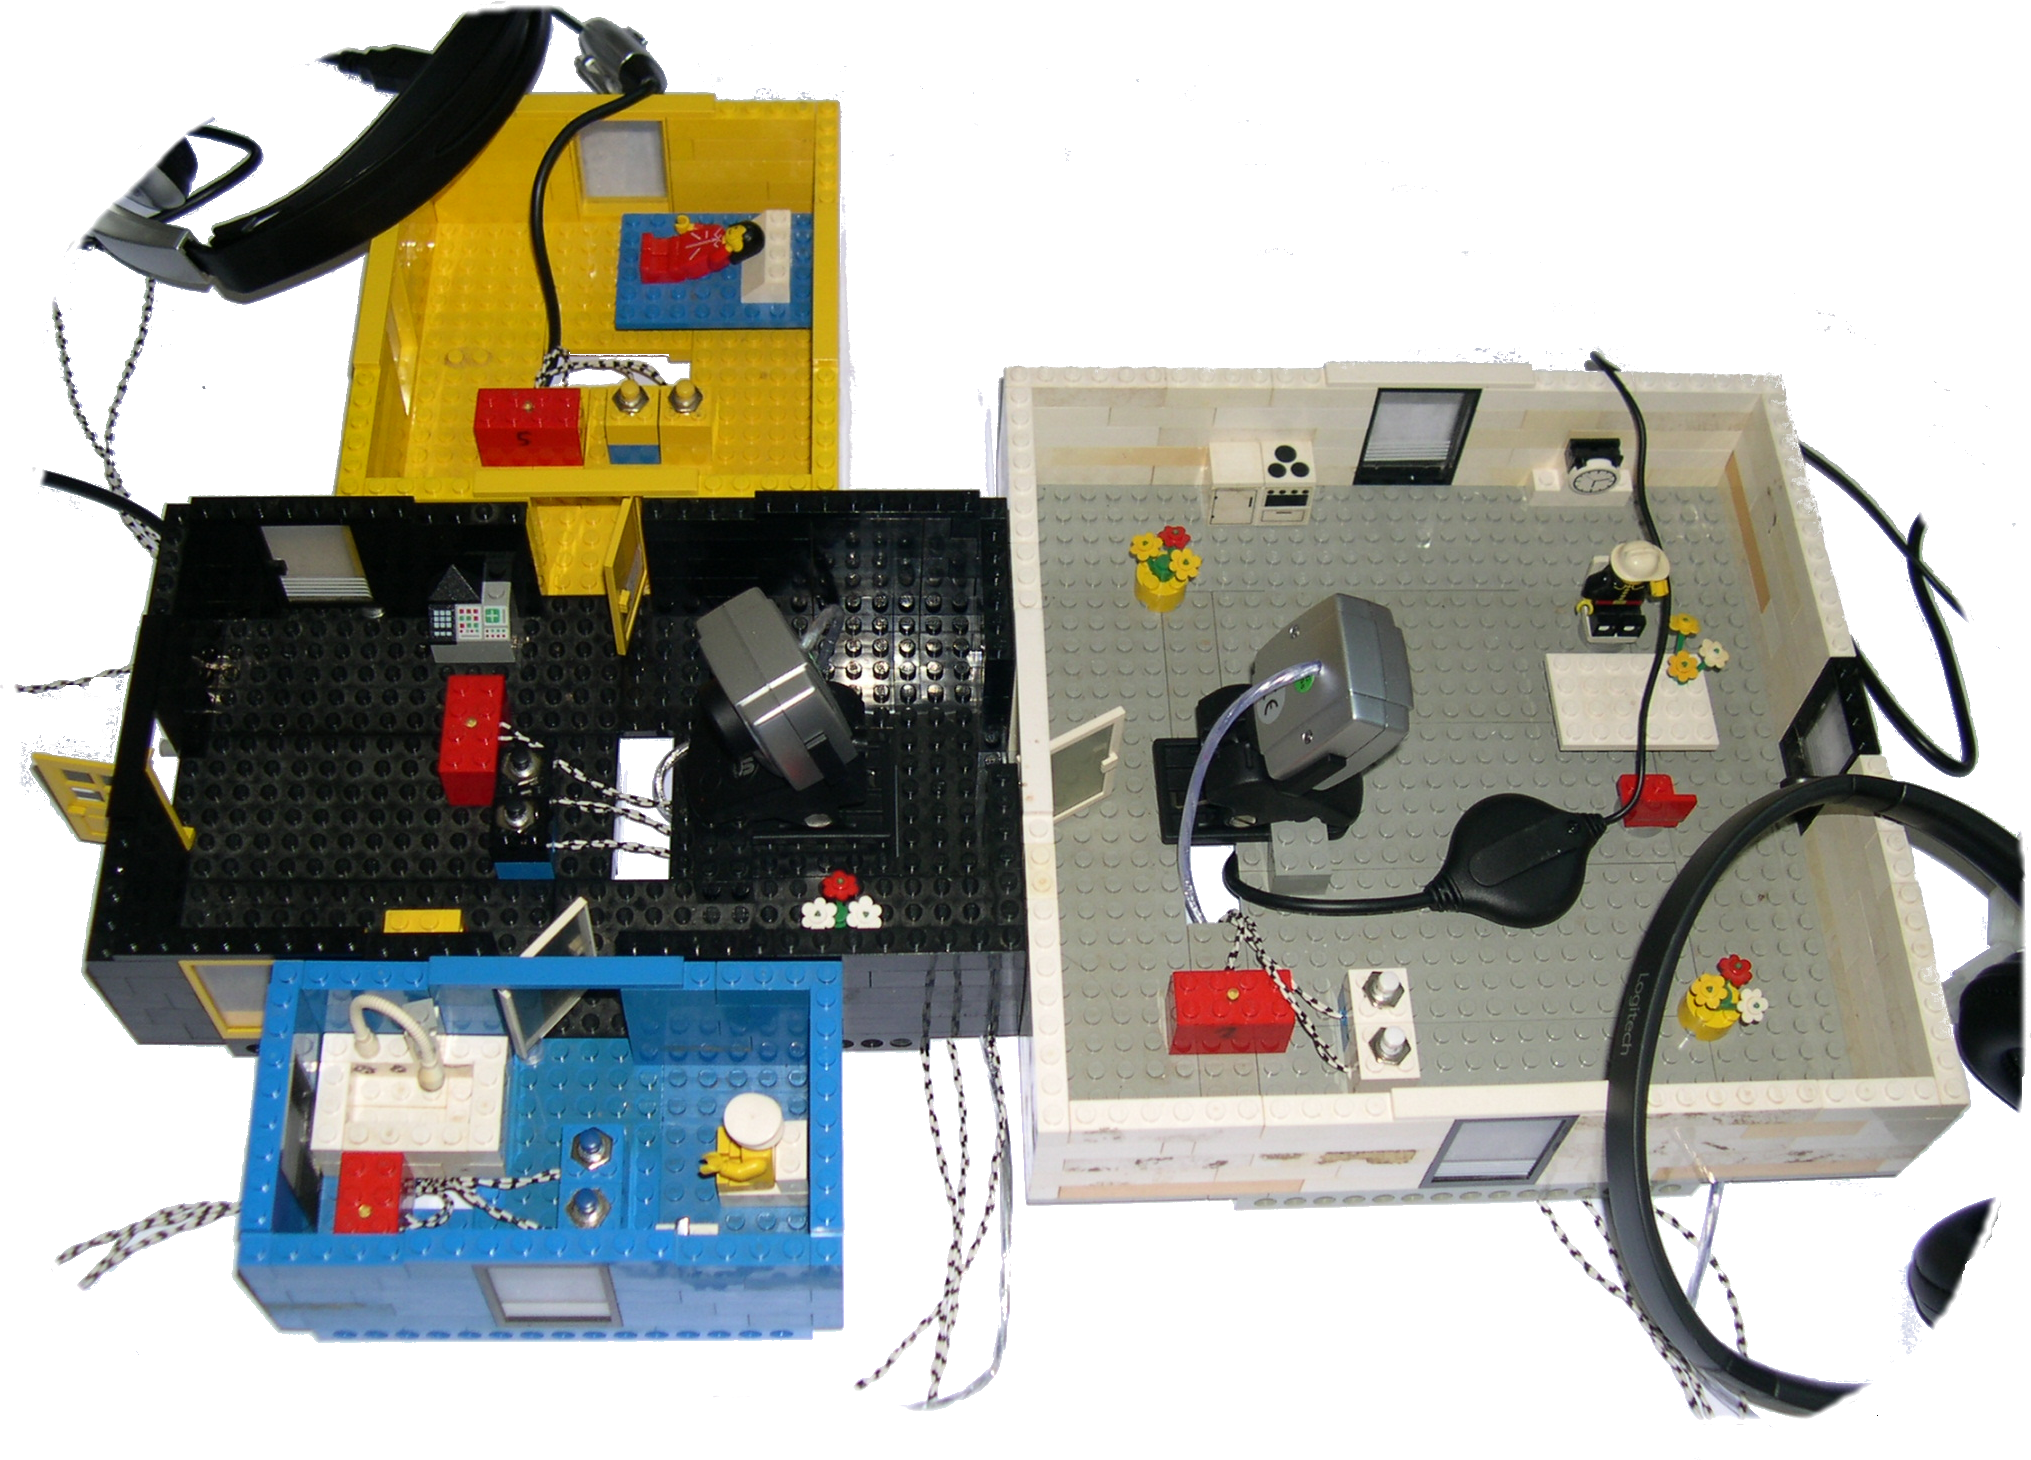 The Lego-eHome-demonstrator in a modified setup.